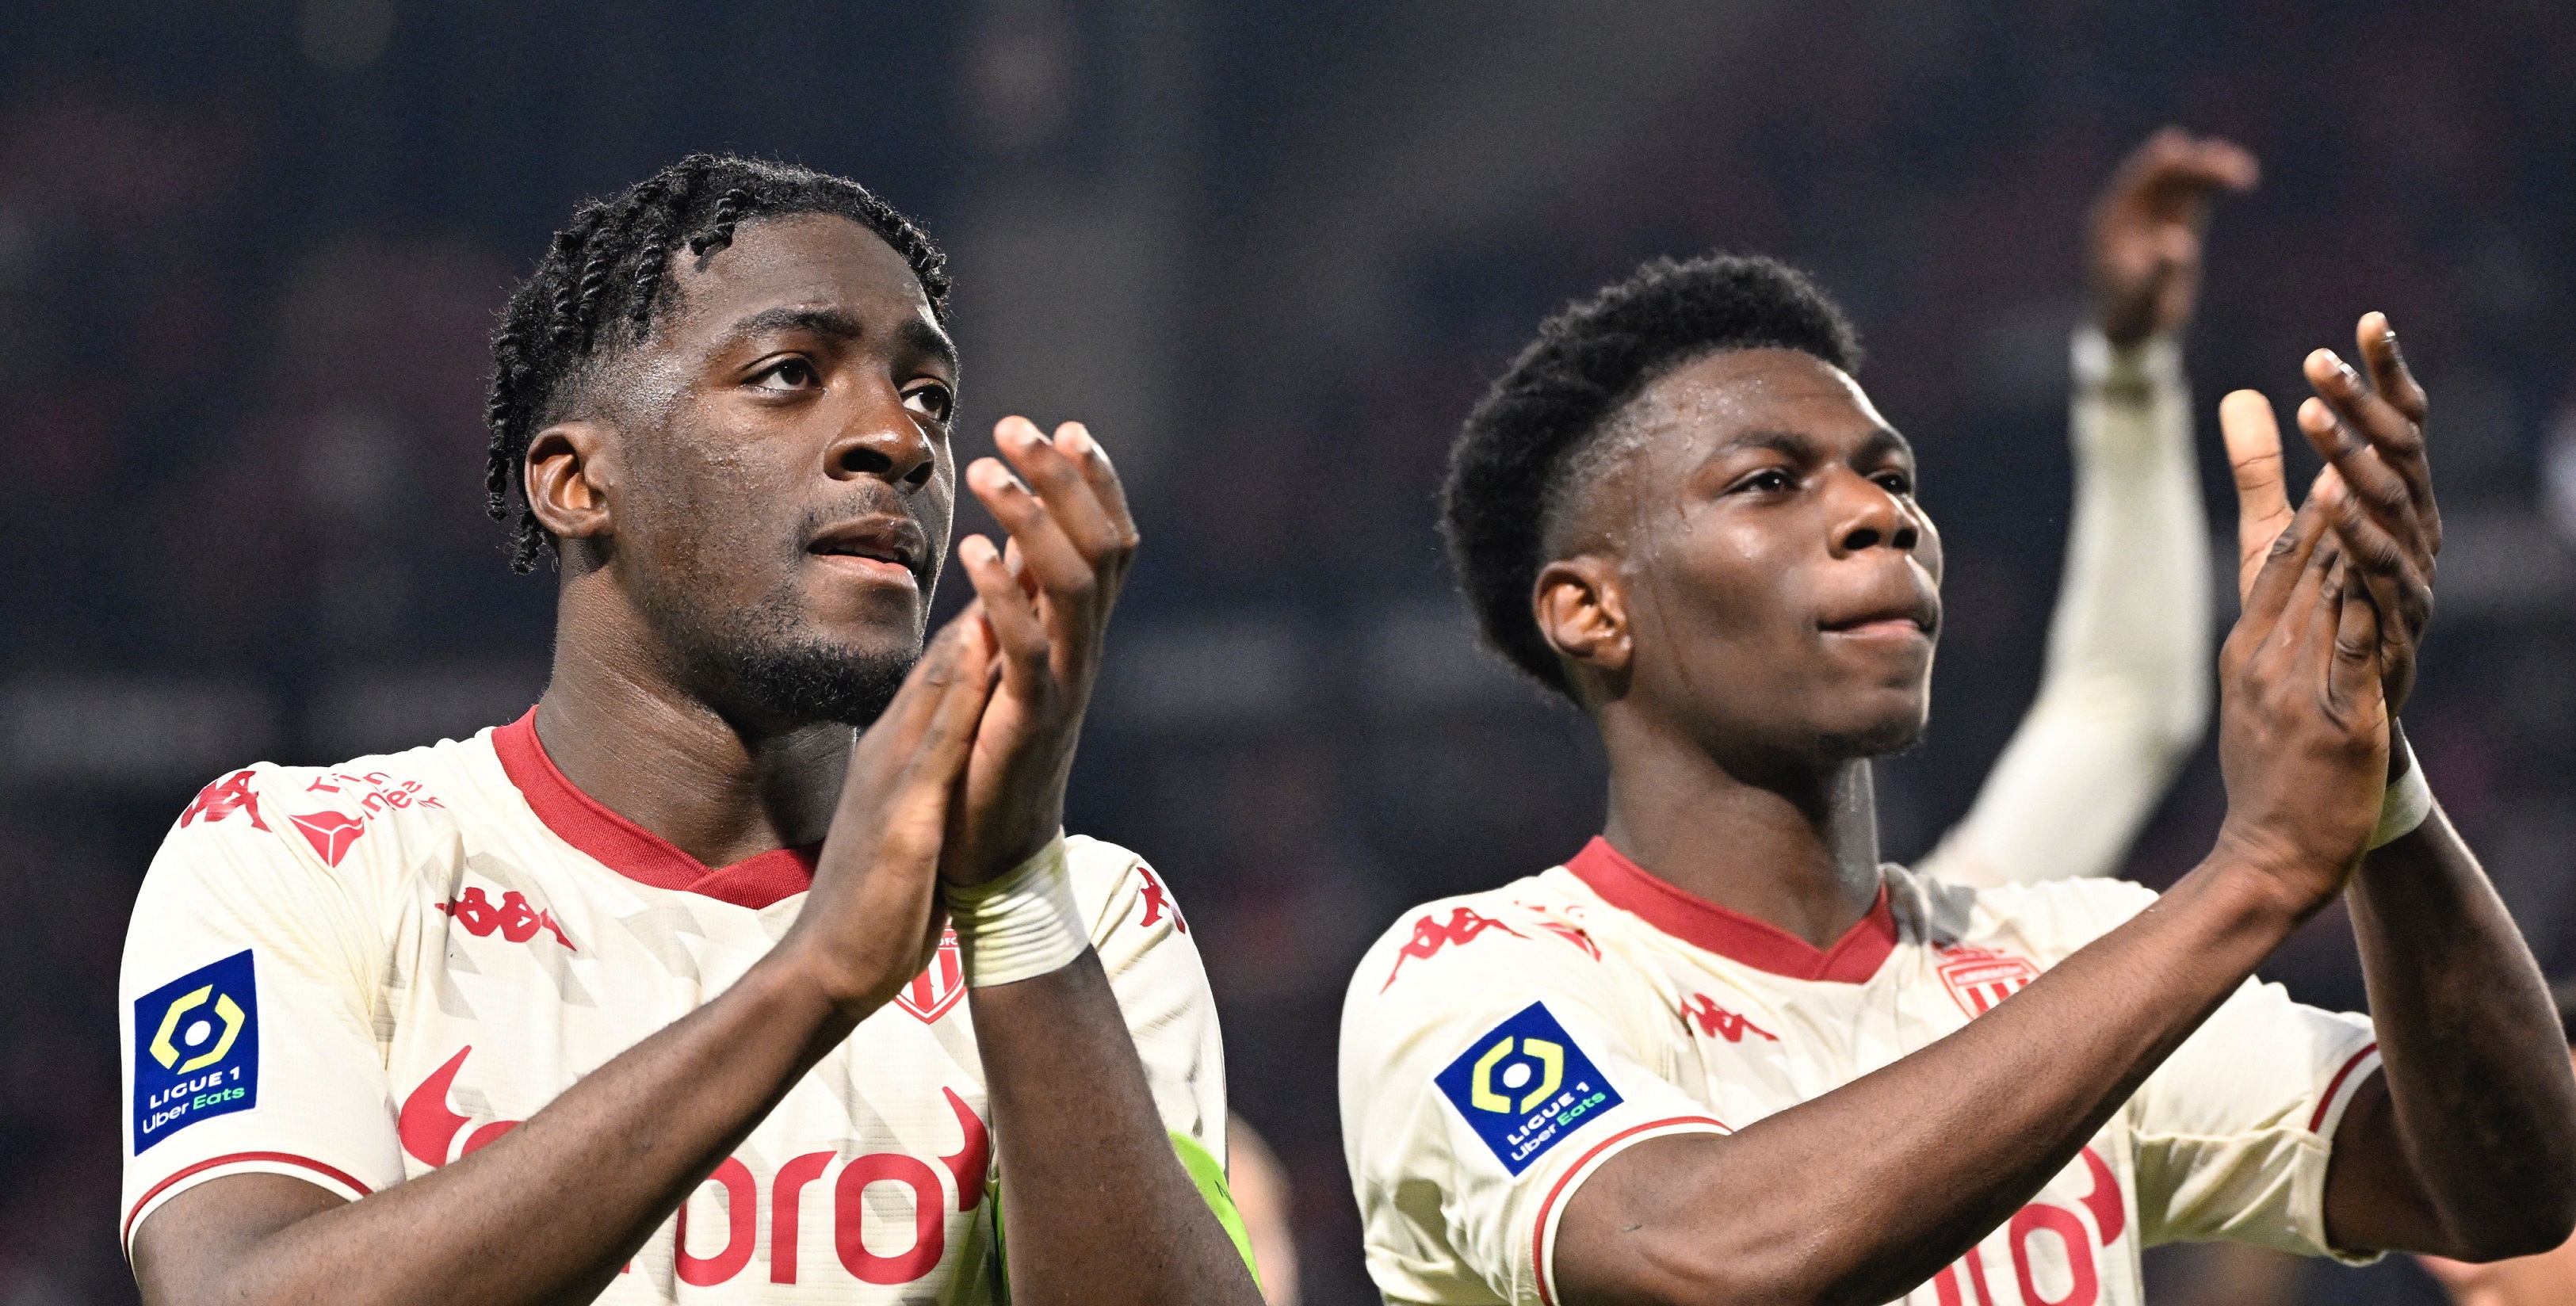 Liverpool to rival Madrid for Ligue 1 star Klopp loves this summer; Reds have made 22-year-old one of several transfer priorities – report